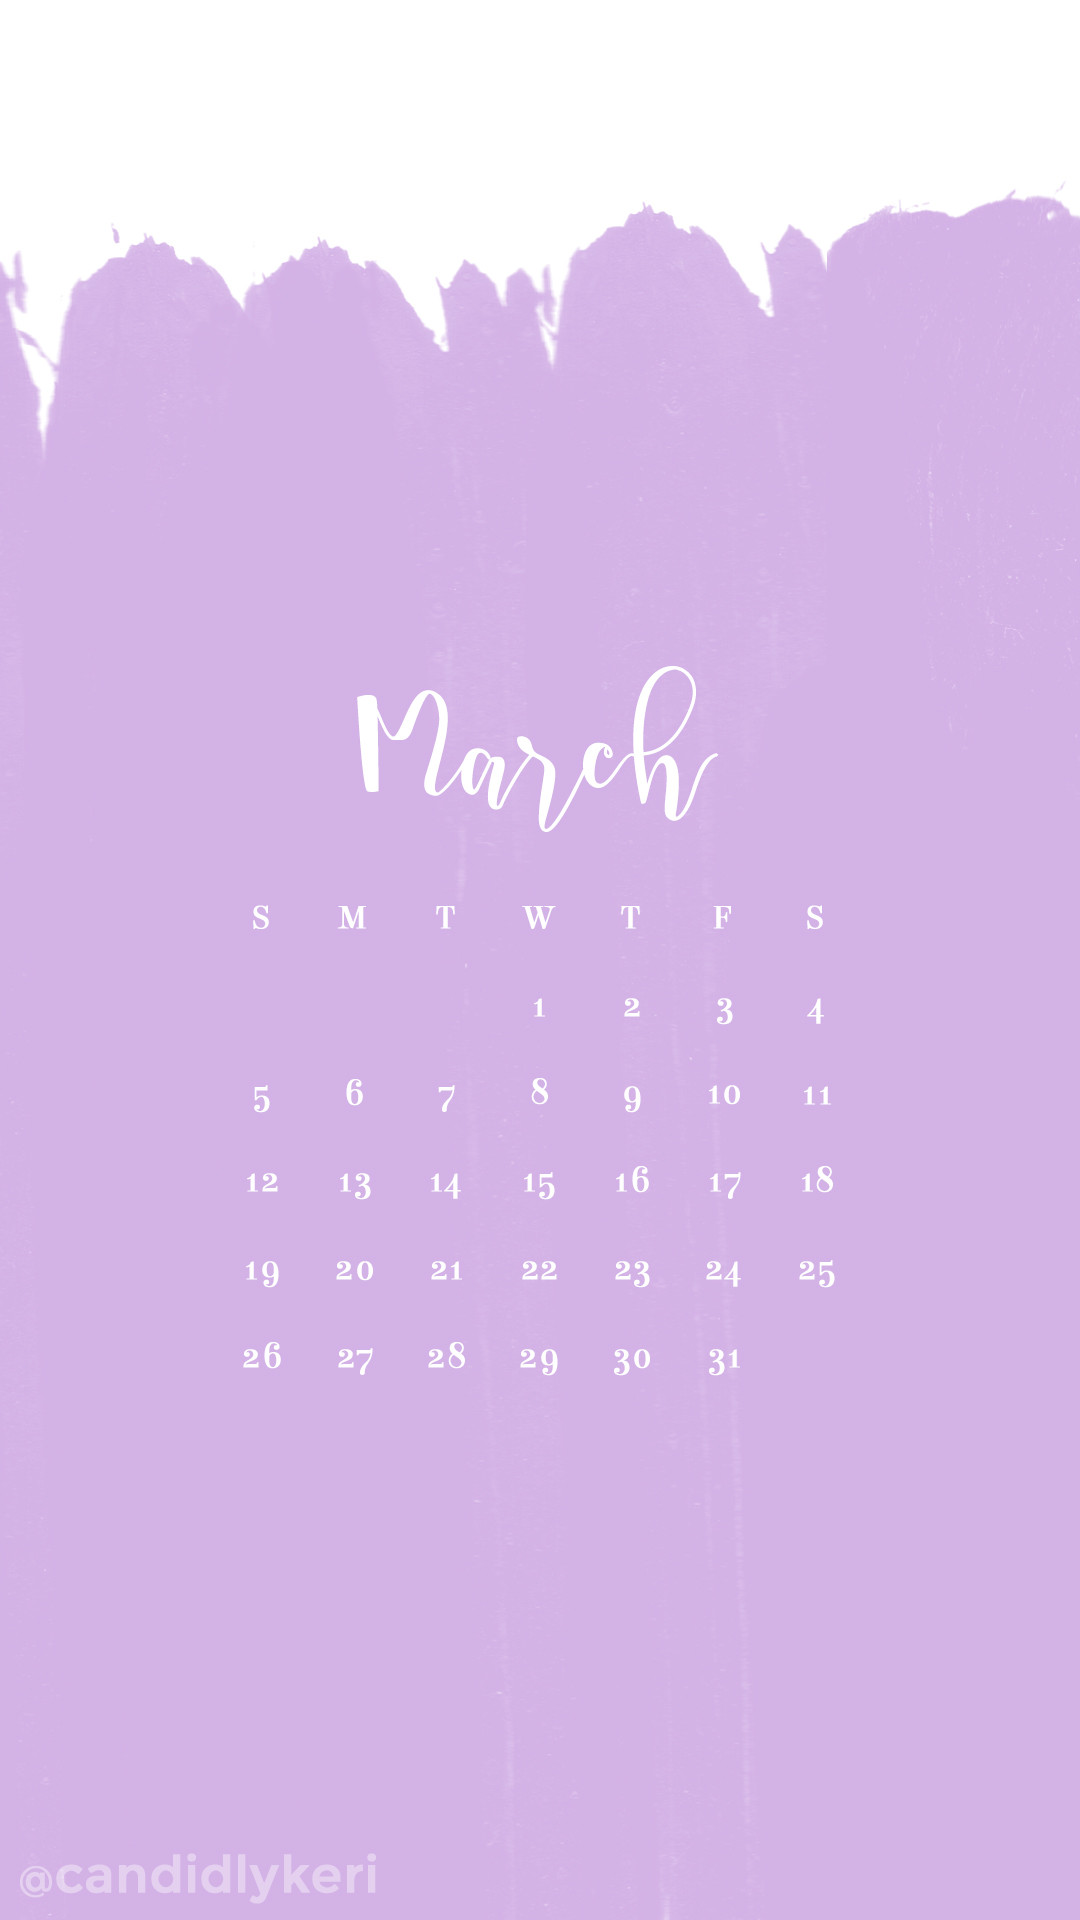 March calendar 2017 wallpaper you can download for free on the blog For any device